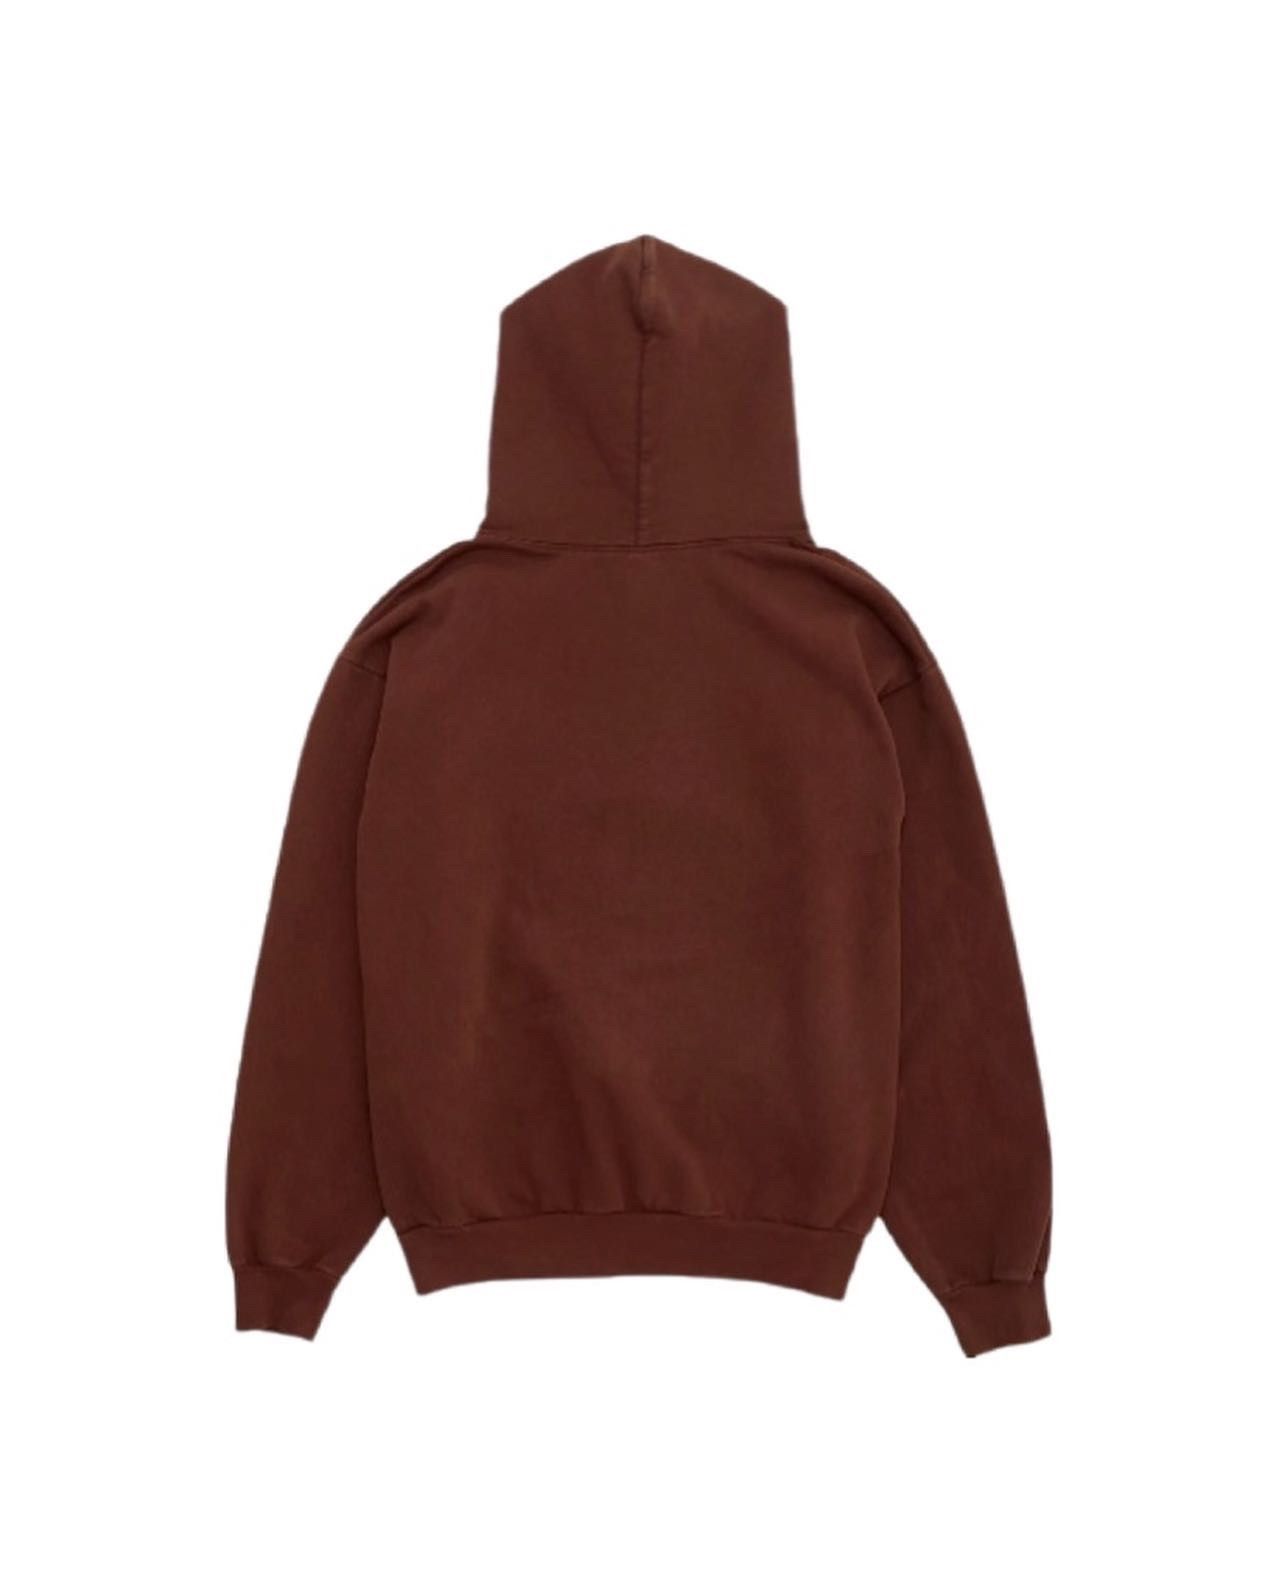 Spider Worldwide Spider Worldwide 555 Angel Number Hoodie Brown Small Size US S / EU 44-46 / 1 - 3 Thumbnail